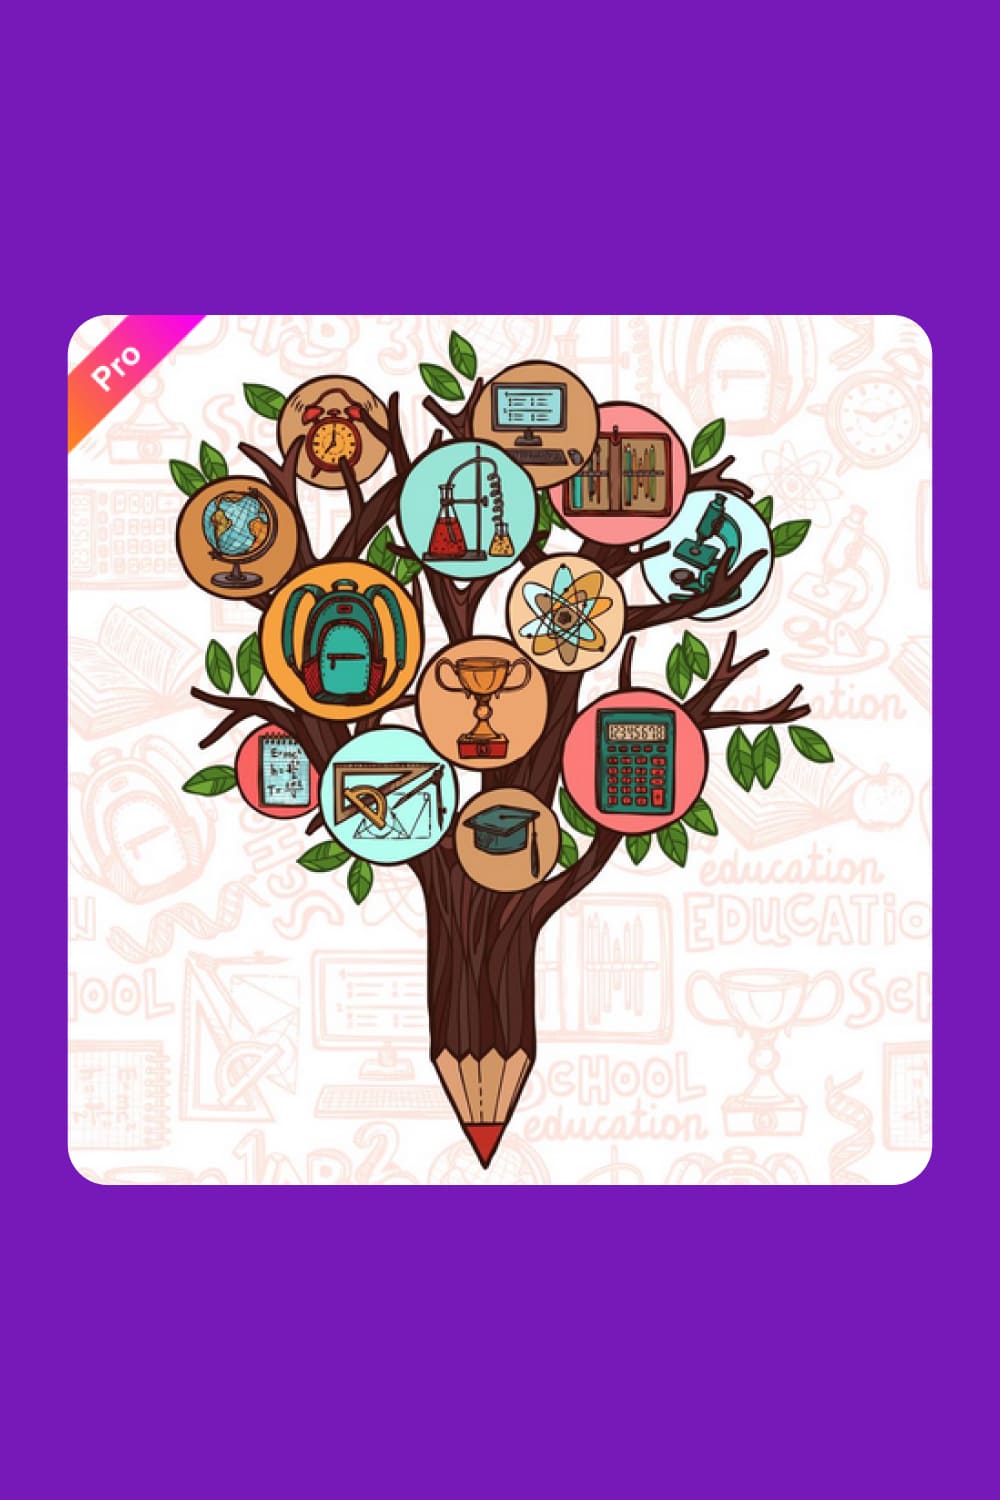 Drawn Tree With Education Icons.